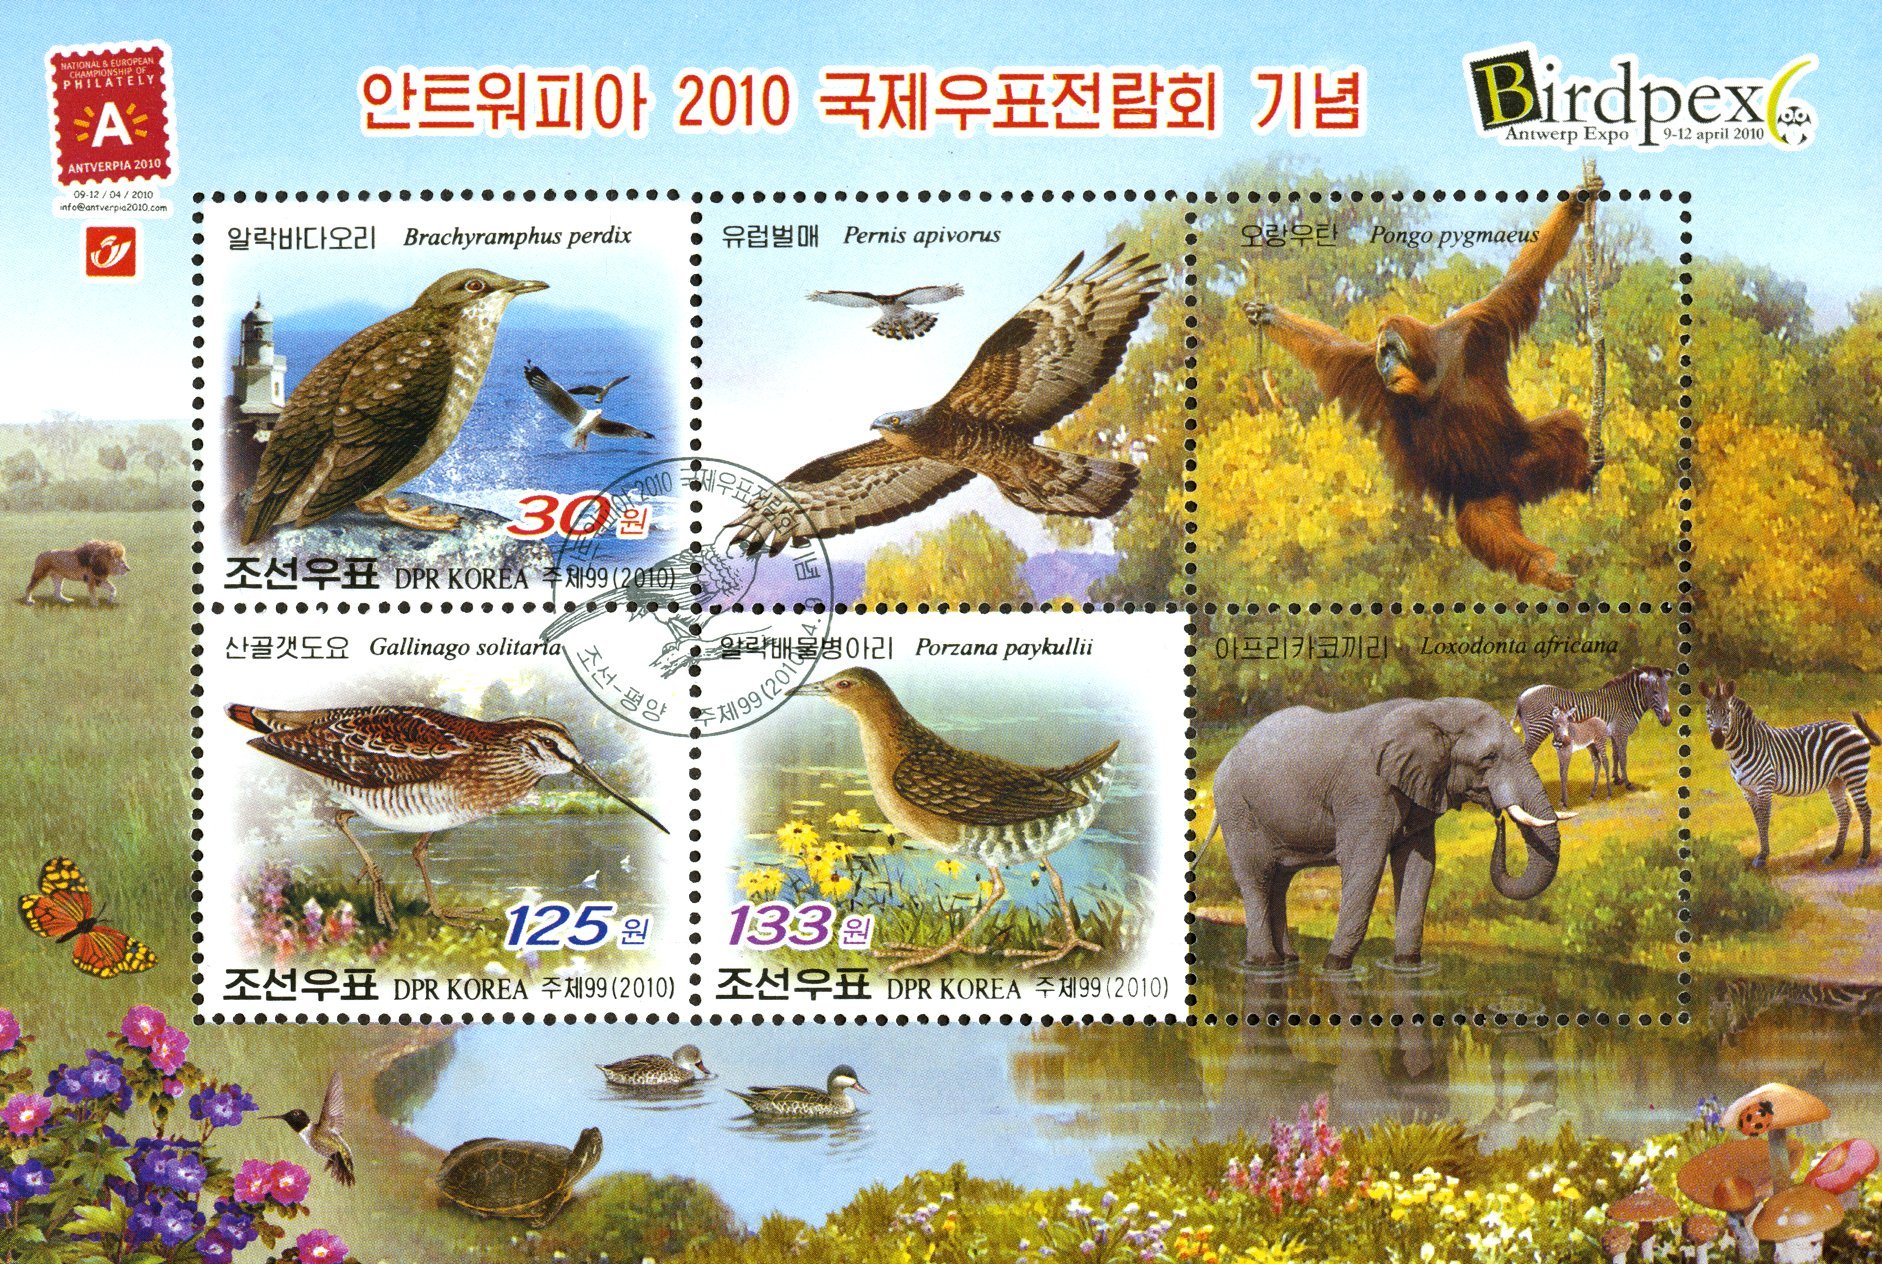 A scene at a nature preserve shows several different brown birds, as well as a swinging orangutan and an elephant wading in a pool.